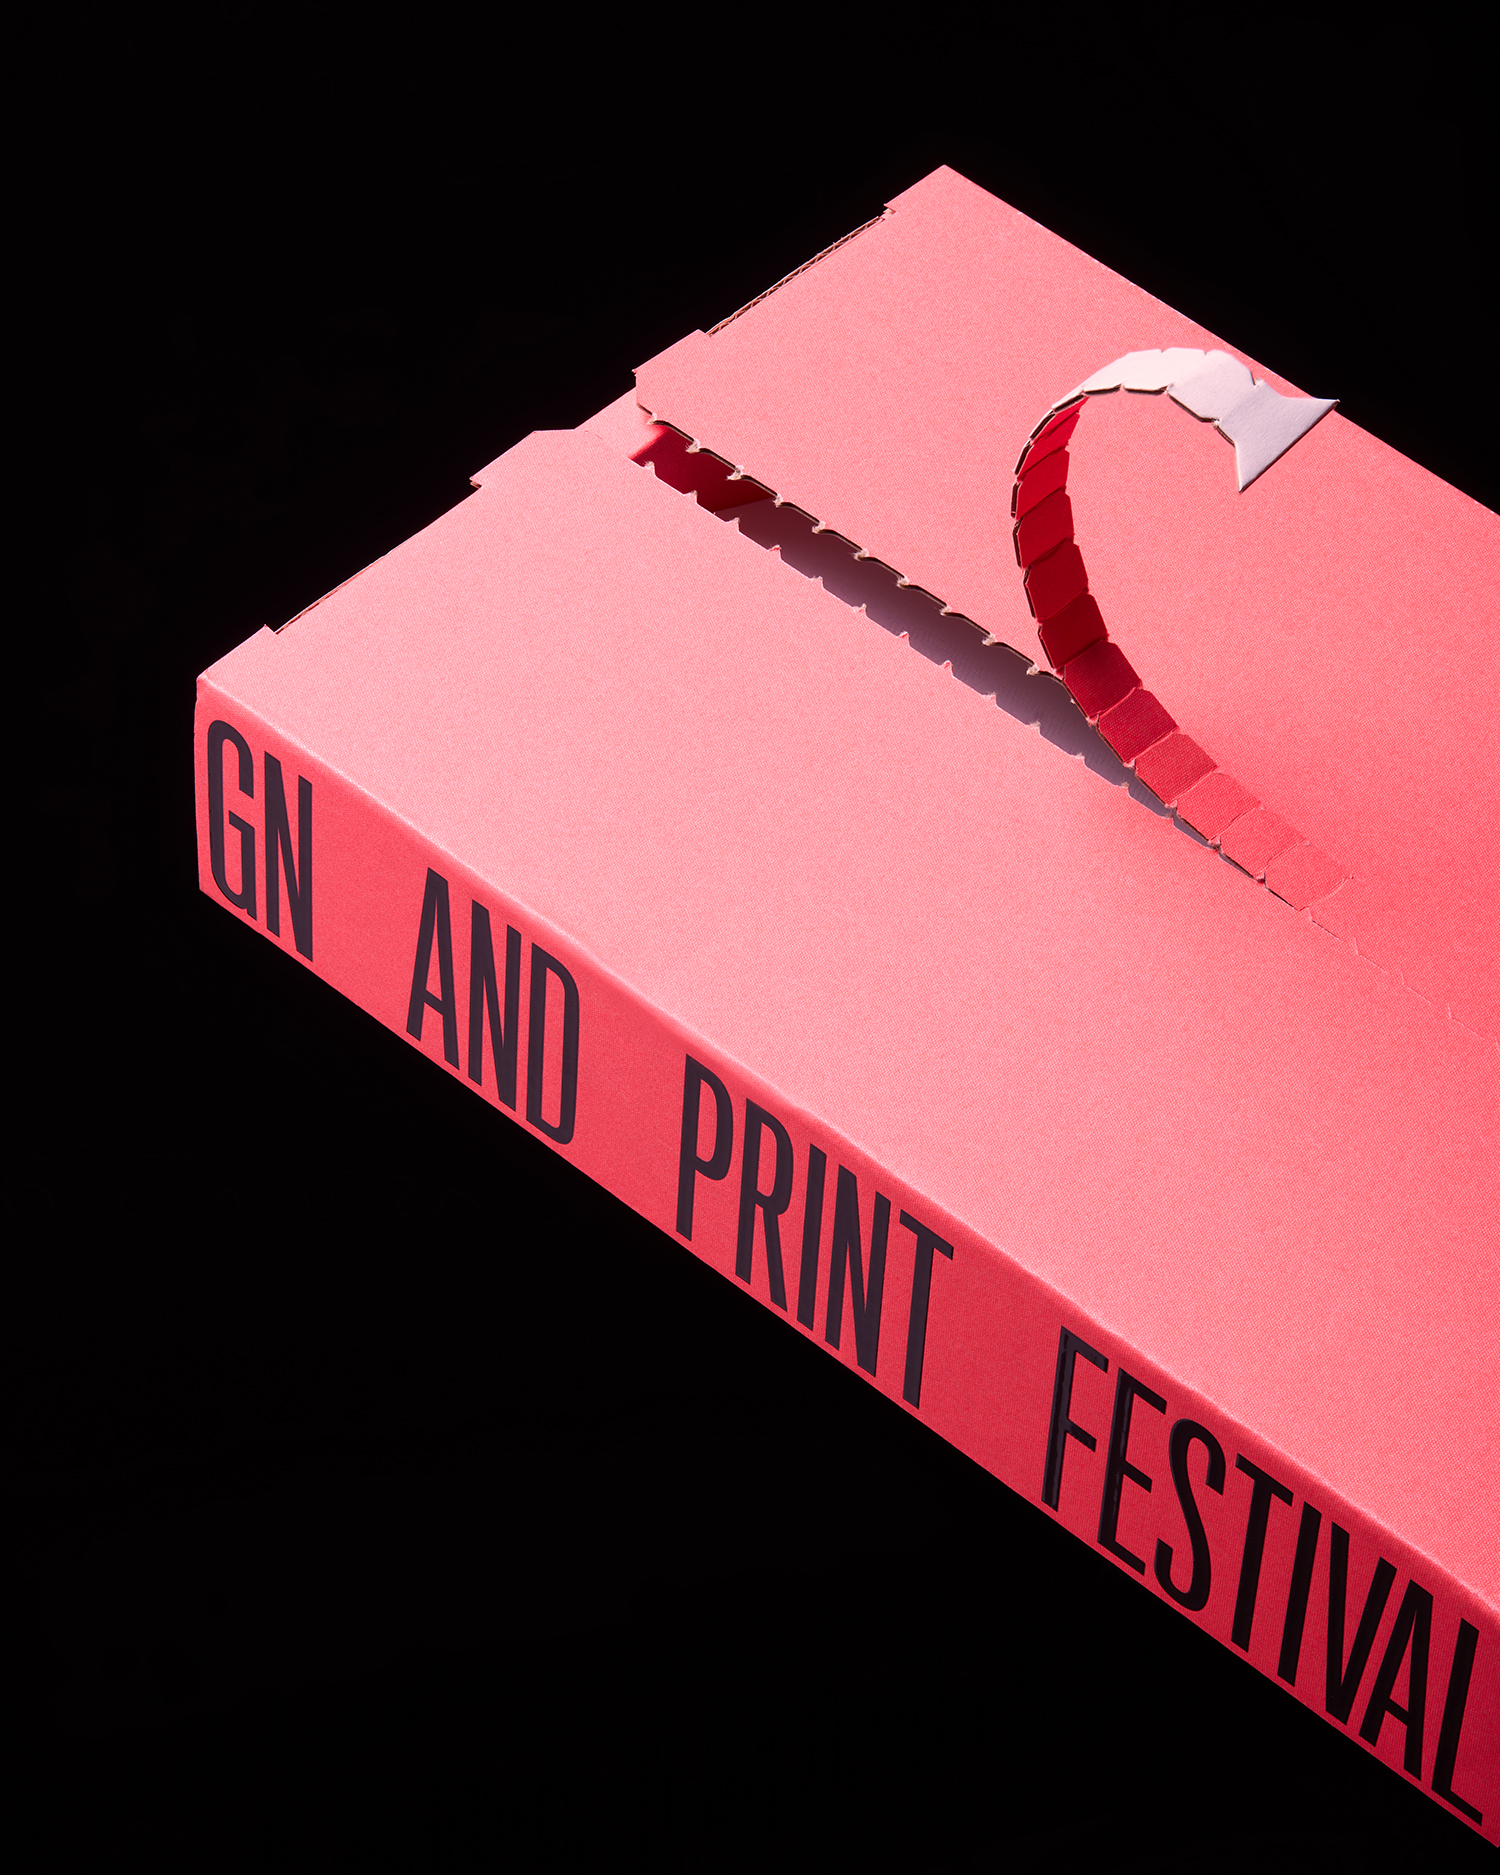 Packaging design and brand communications by Commission for design and print festival Unfolded at The Gmund Paper Factory